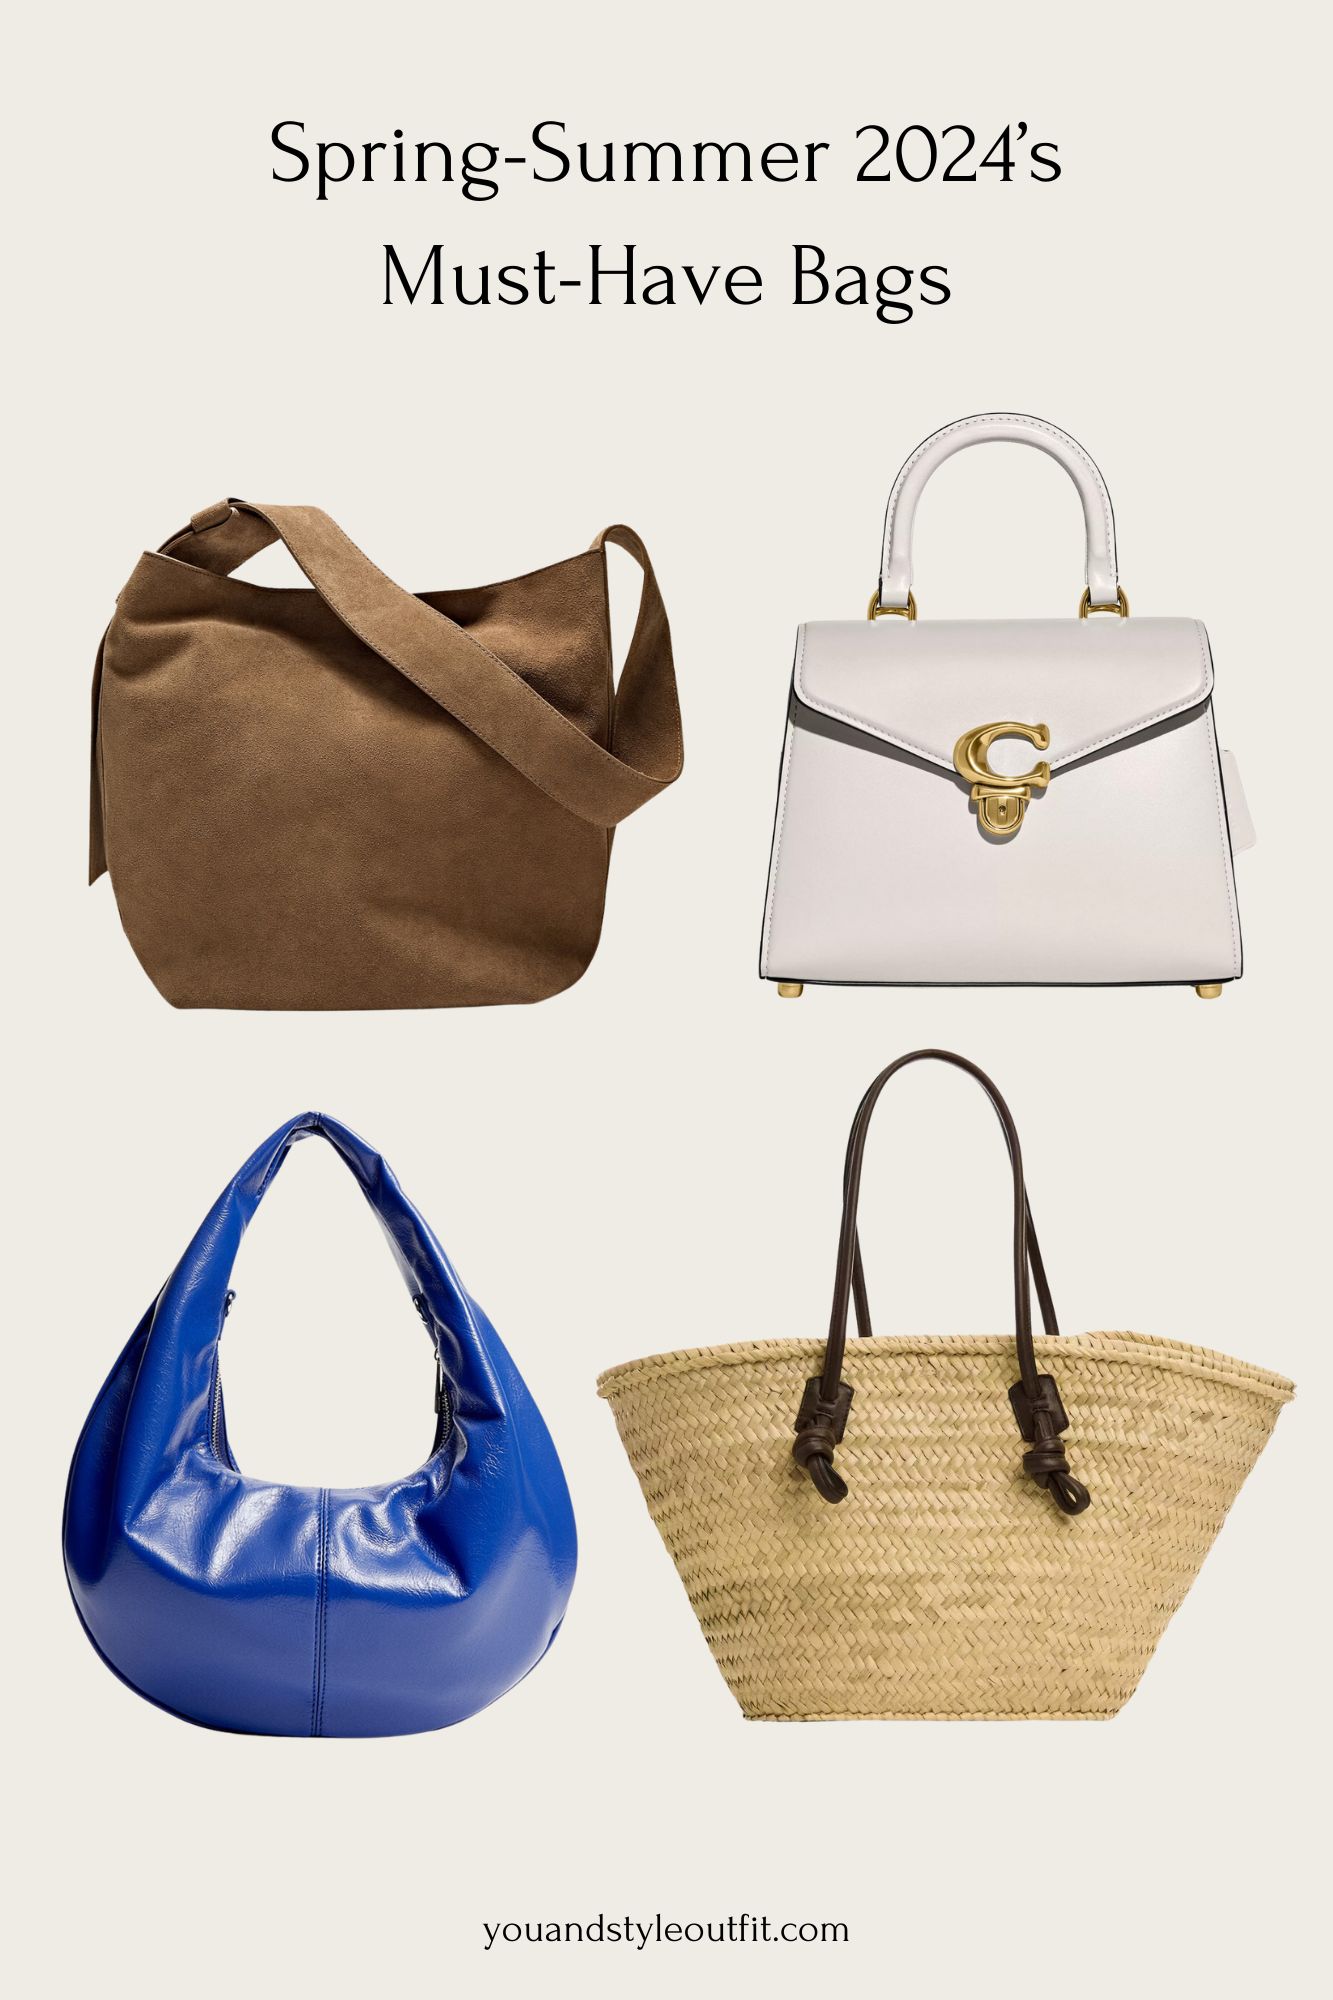 Spring-Summer 2024’s Must-Have Bags